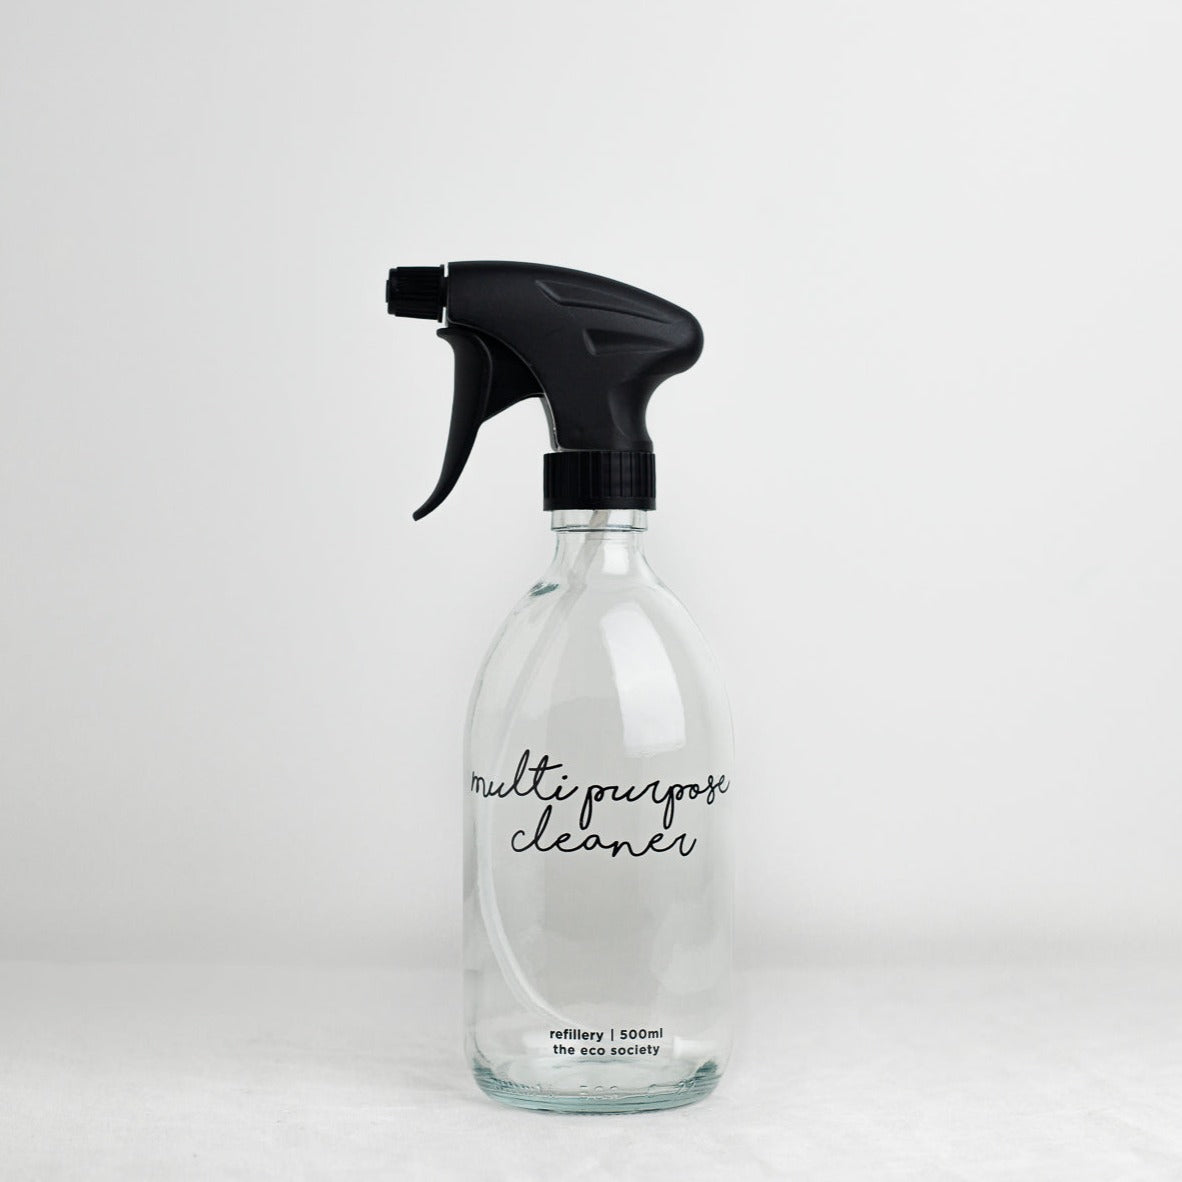 Clear Glass Bottle with Black printed text "Multipurpose Cleaner" 500ml Refillery Bottle